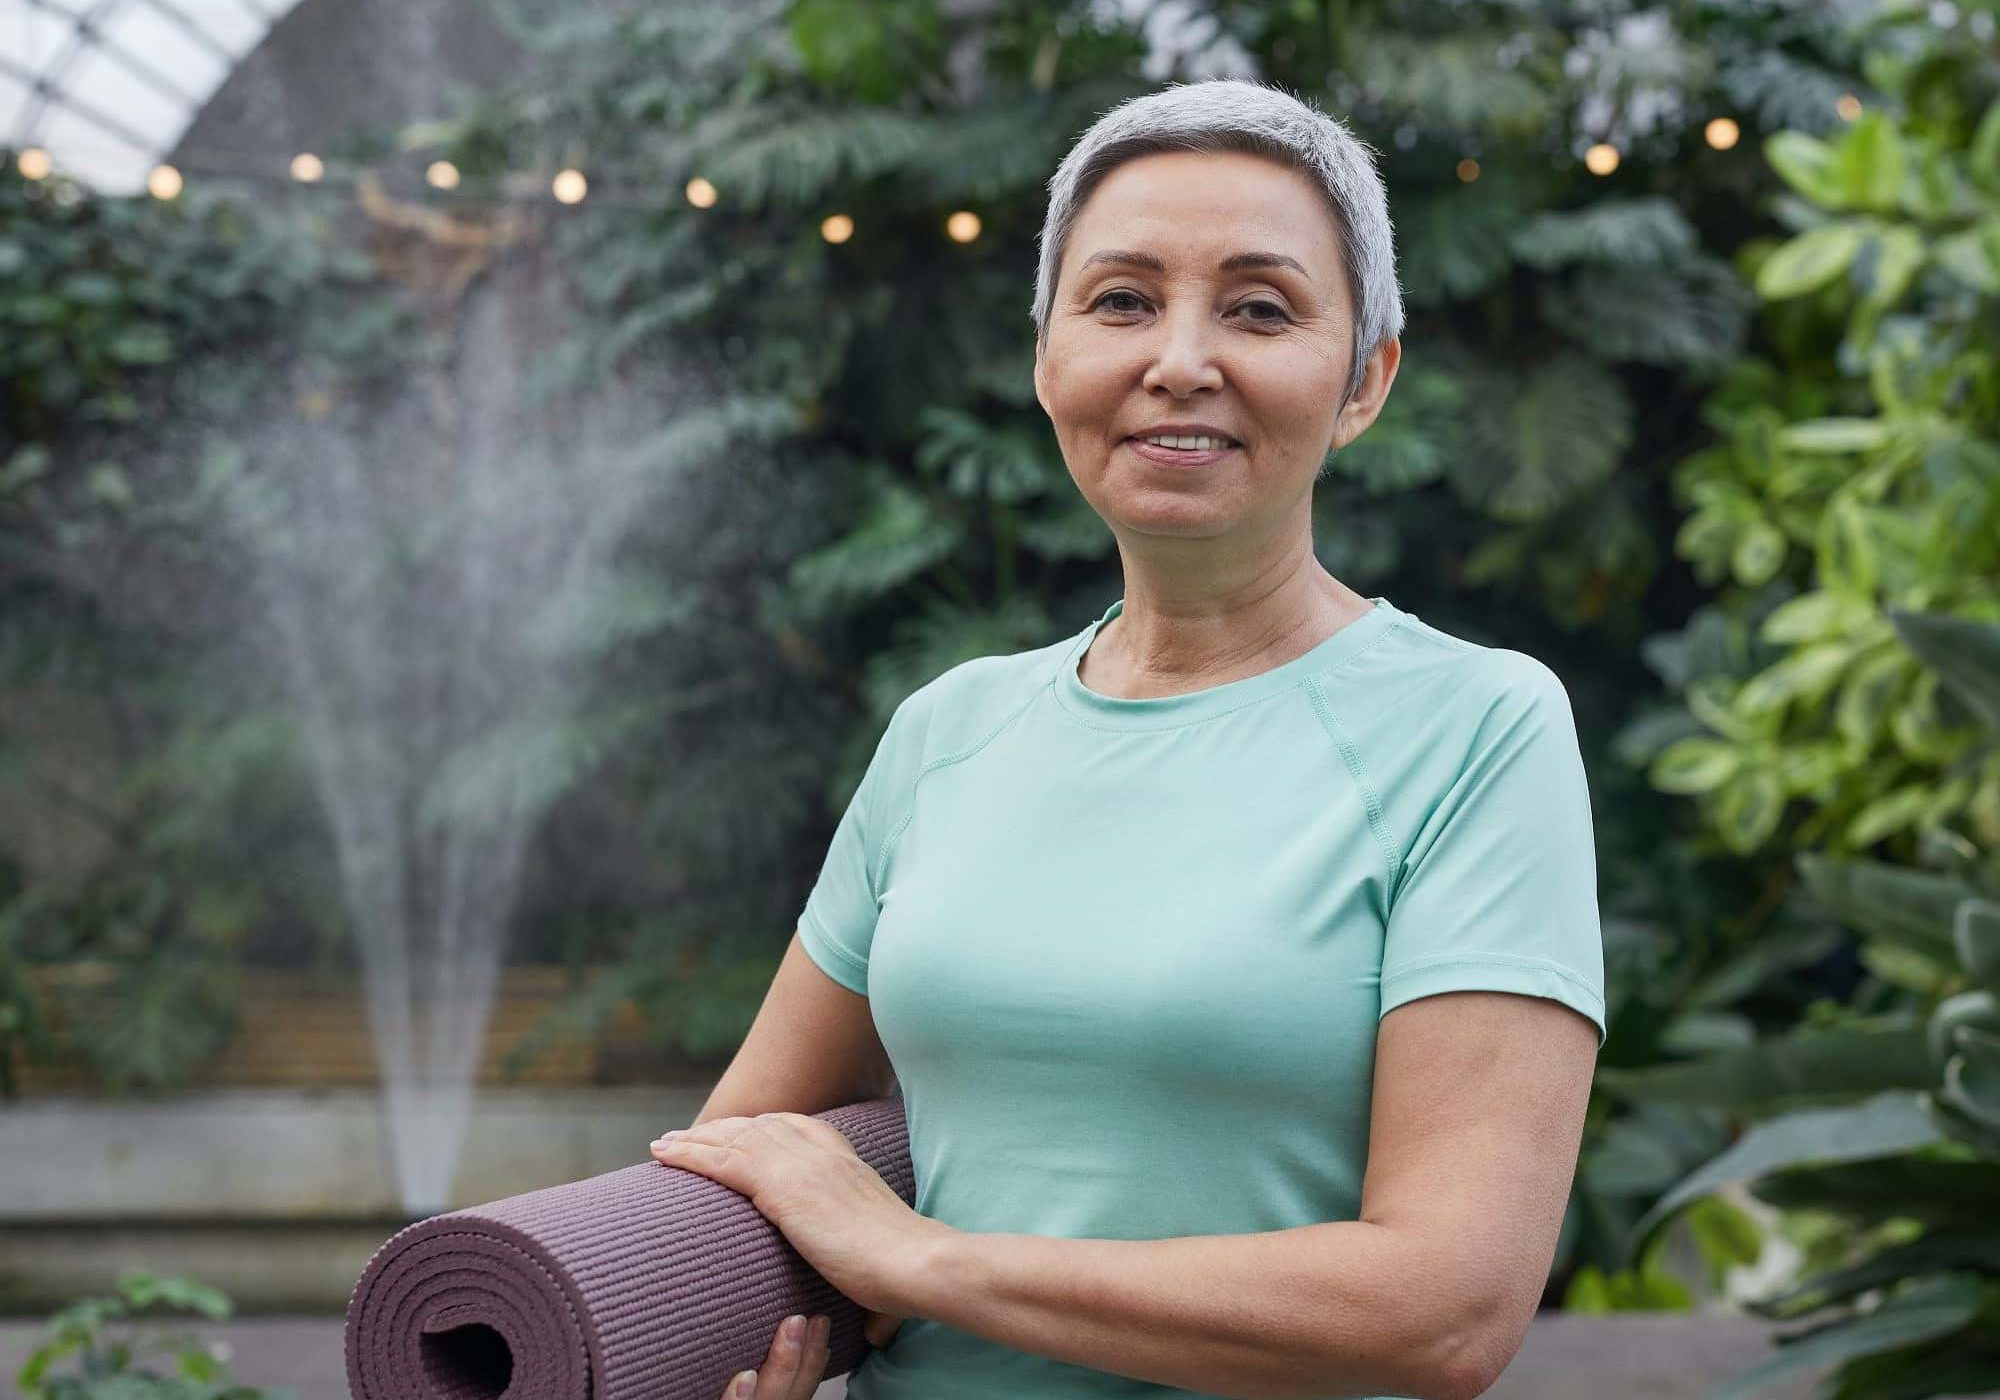 Woman Smiling While Holding a Yoga Mat